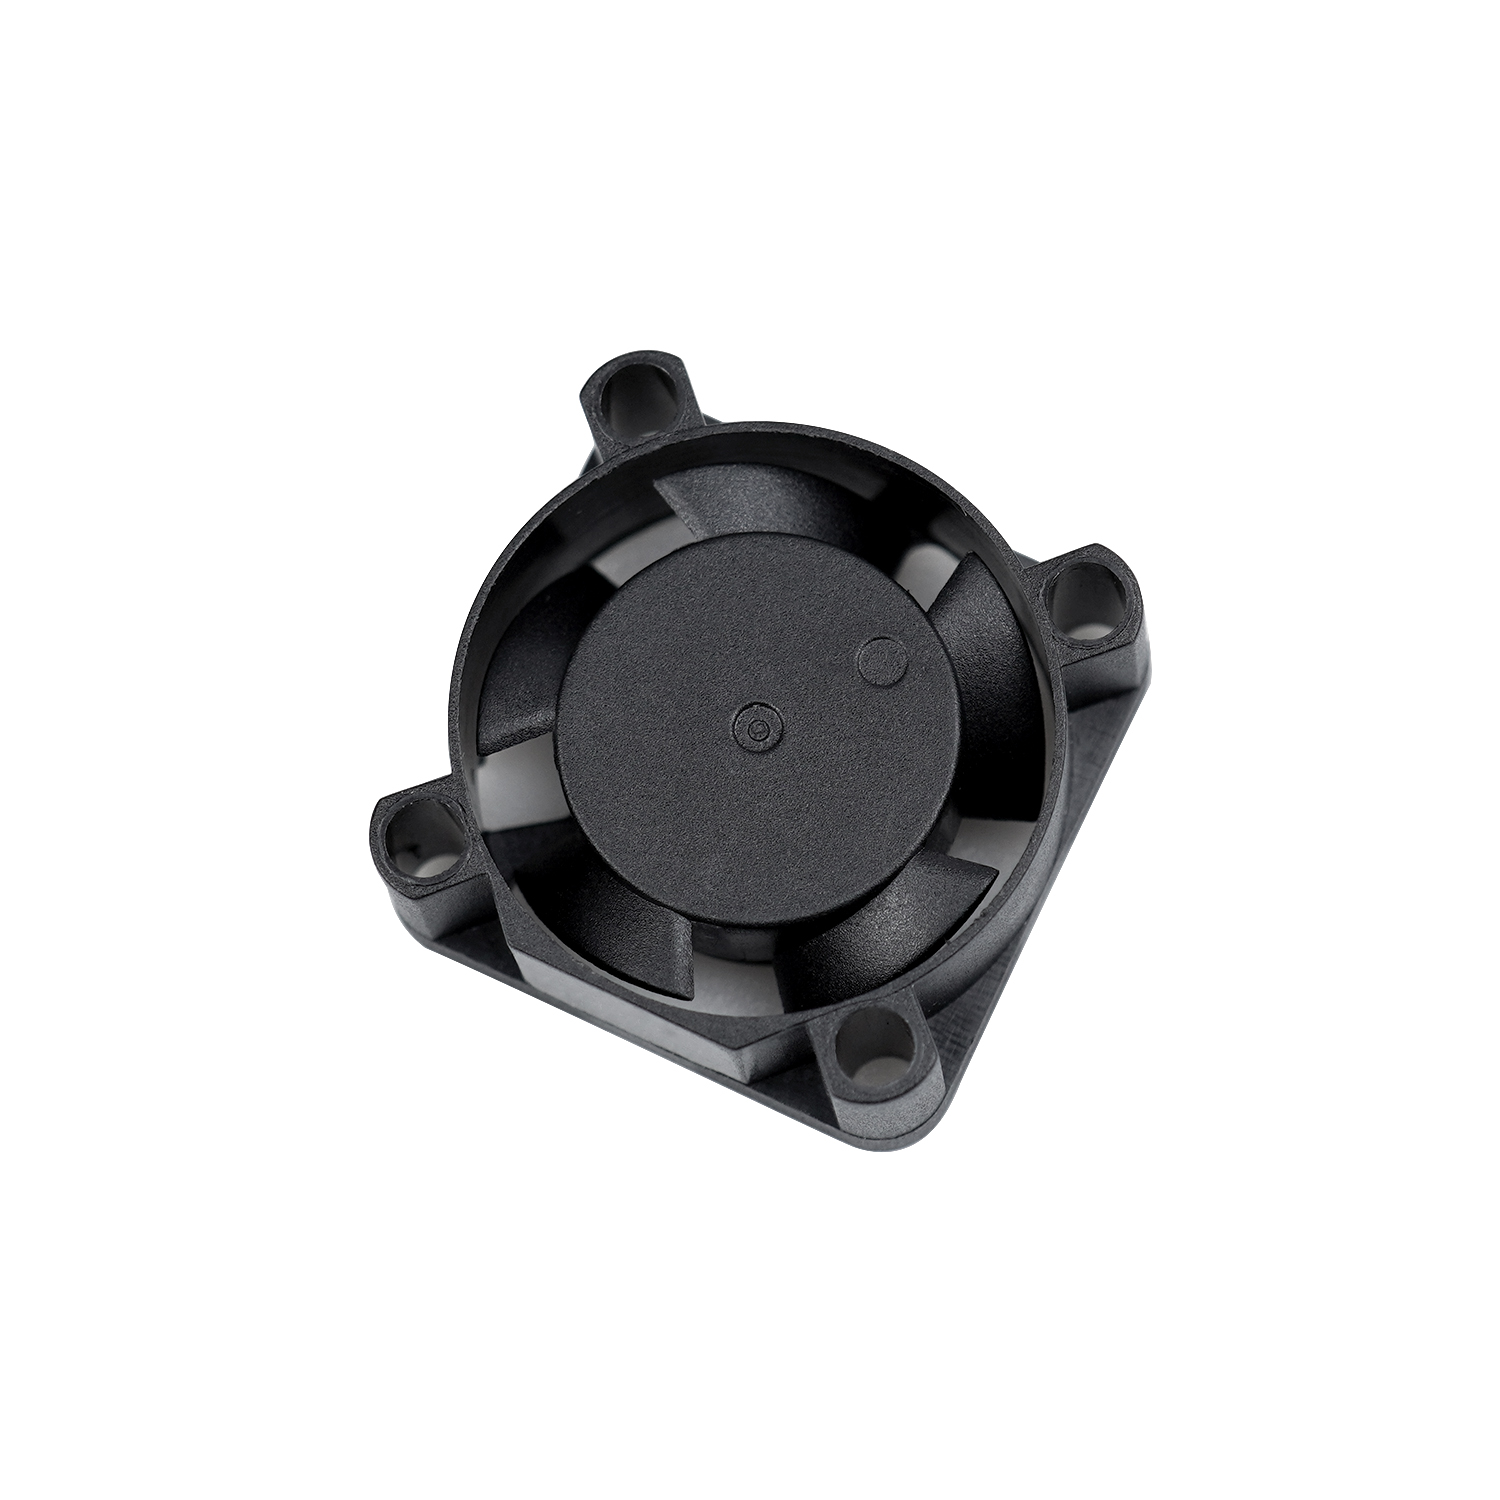 12 Volt 25x25x9 Mm Variable Speed DC Axial Fan